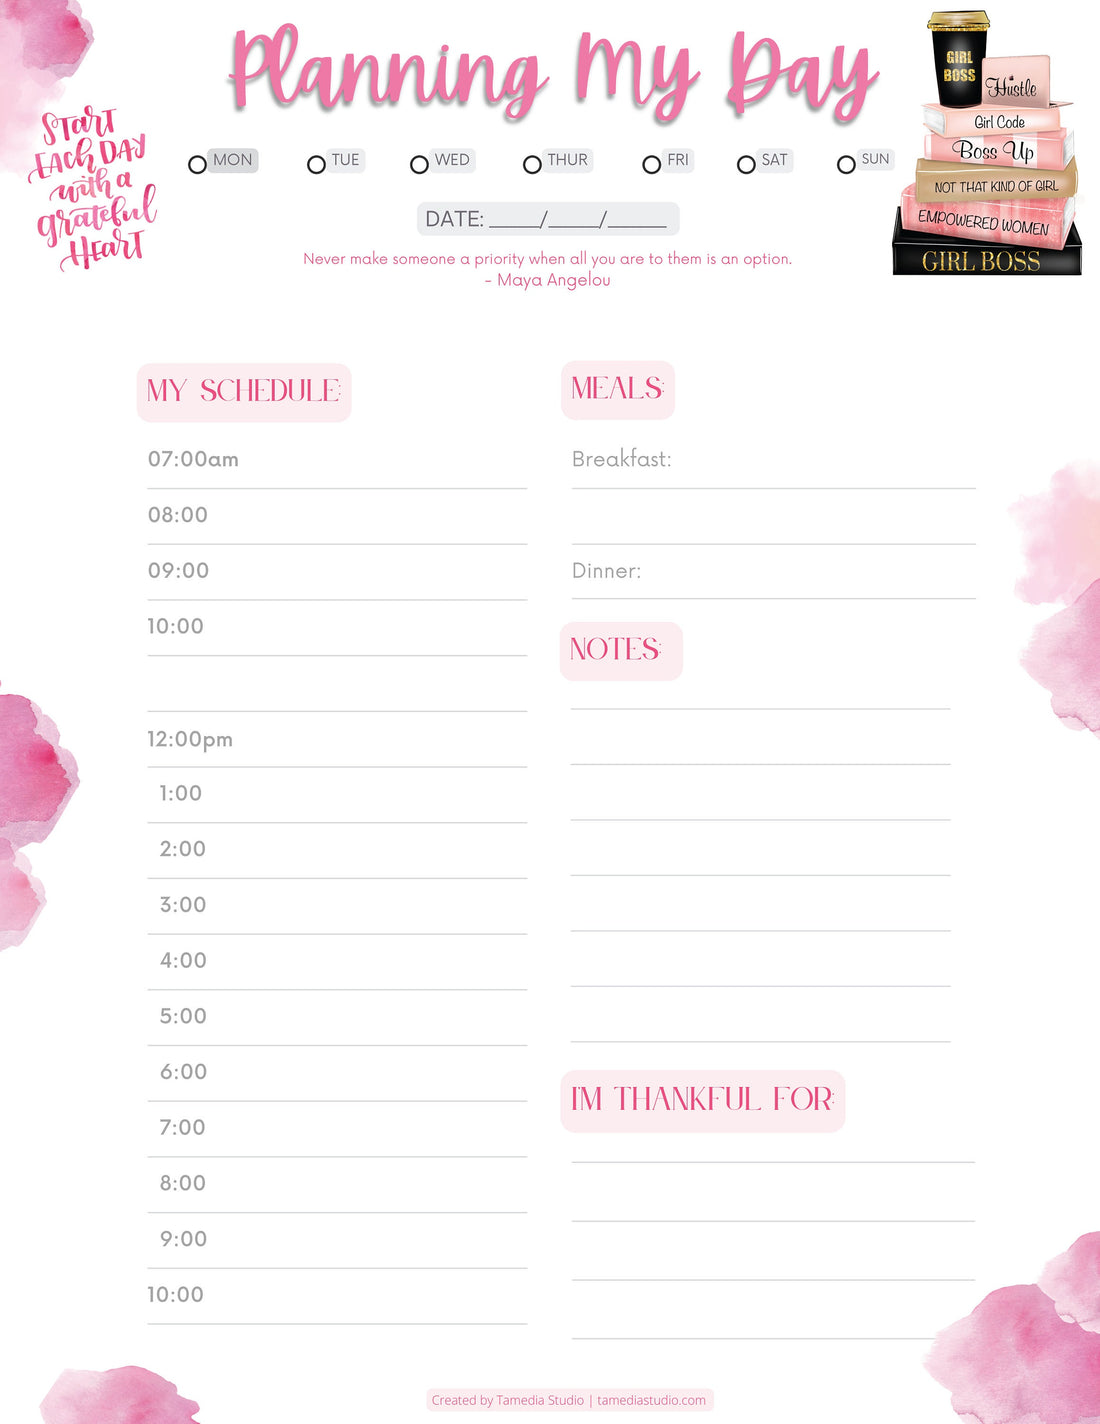 Girl Boss Notepad | Girl Boss | Daily Schedule Notepad | Daily Planner | Girl Boss Stationery | Girl Boss Planner | Free Stylus Pen Included